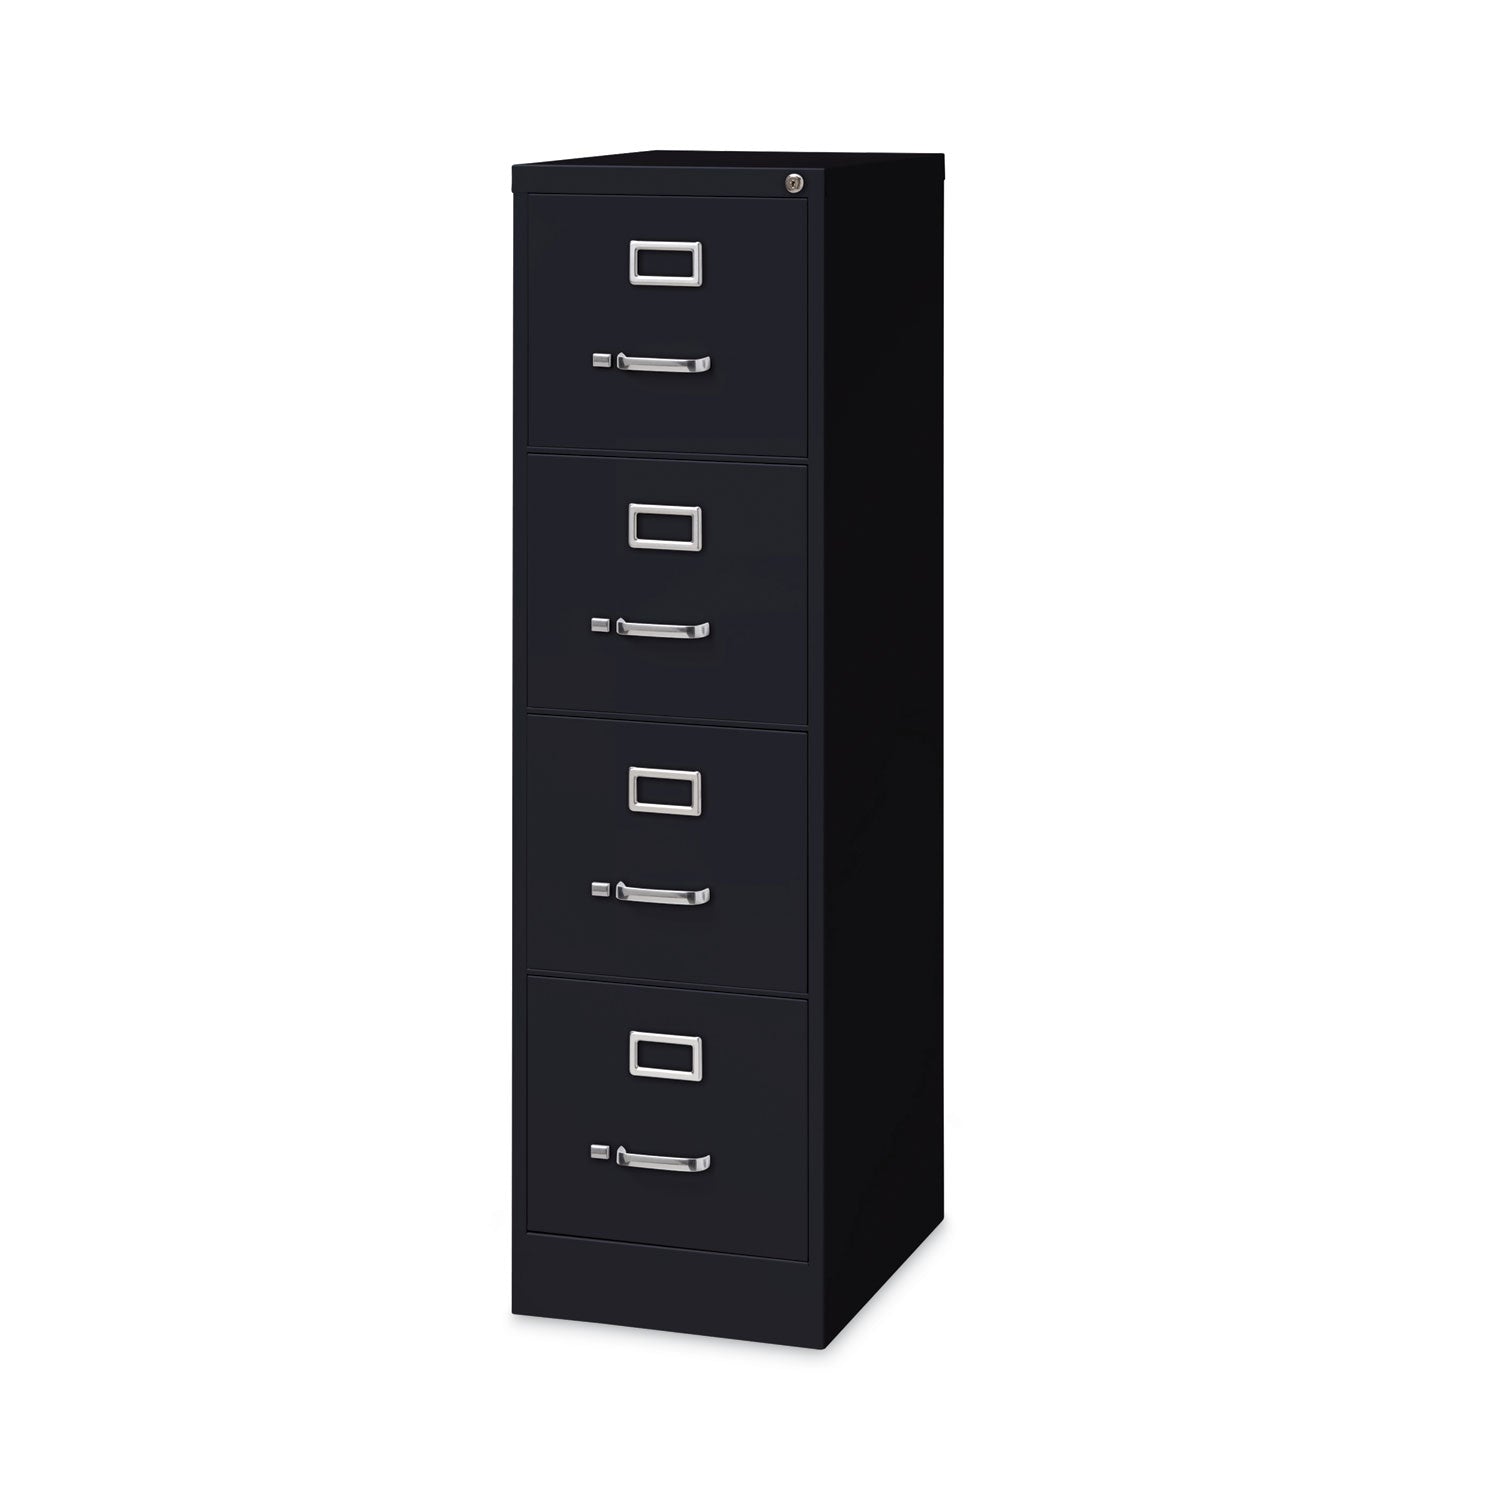 vertical-letter-file-cabinet-4-letter-size-file-drawers-black-15-x-22-x-52_hid17892 - 2